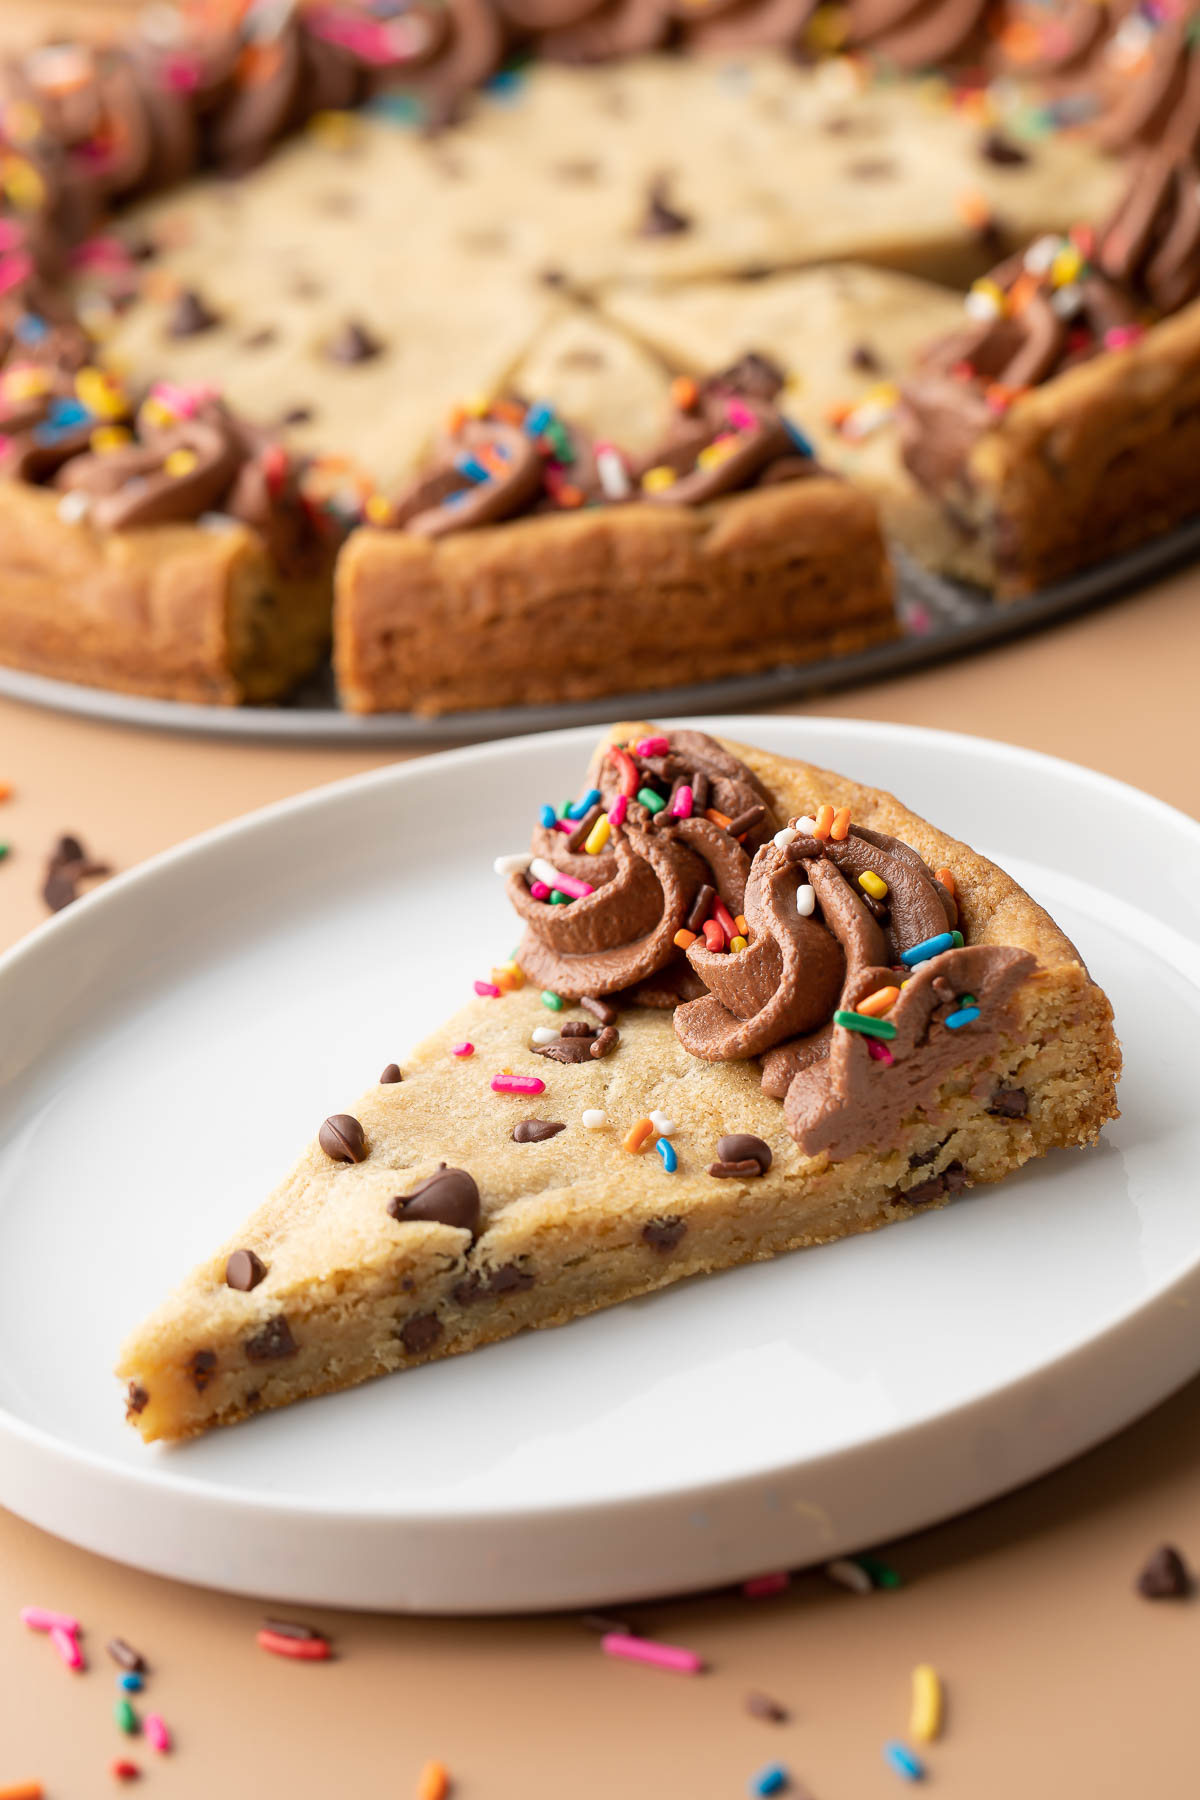 Plated Cookie Cake Slice with Frosting and Sprinkles